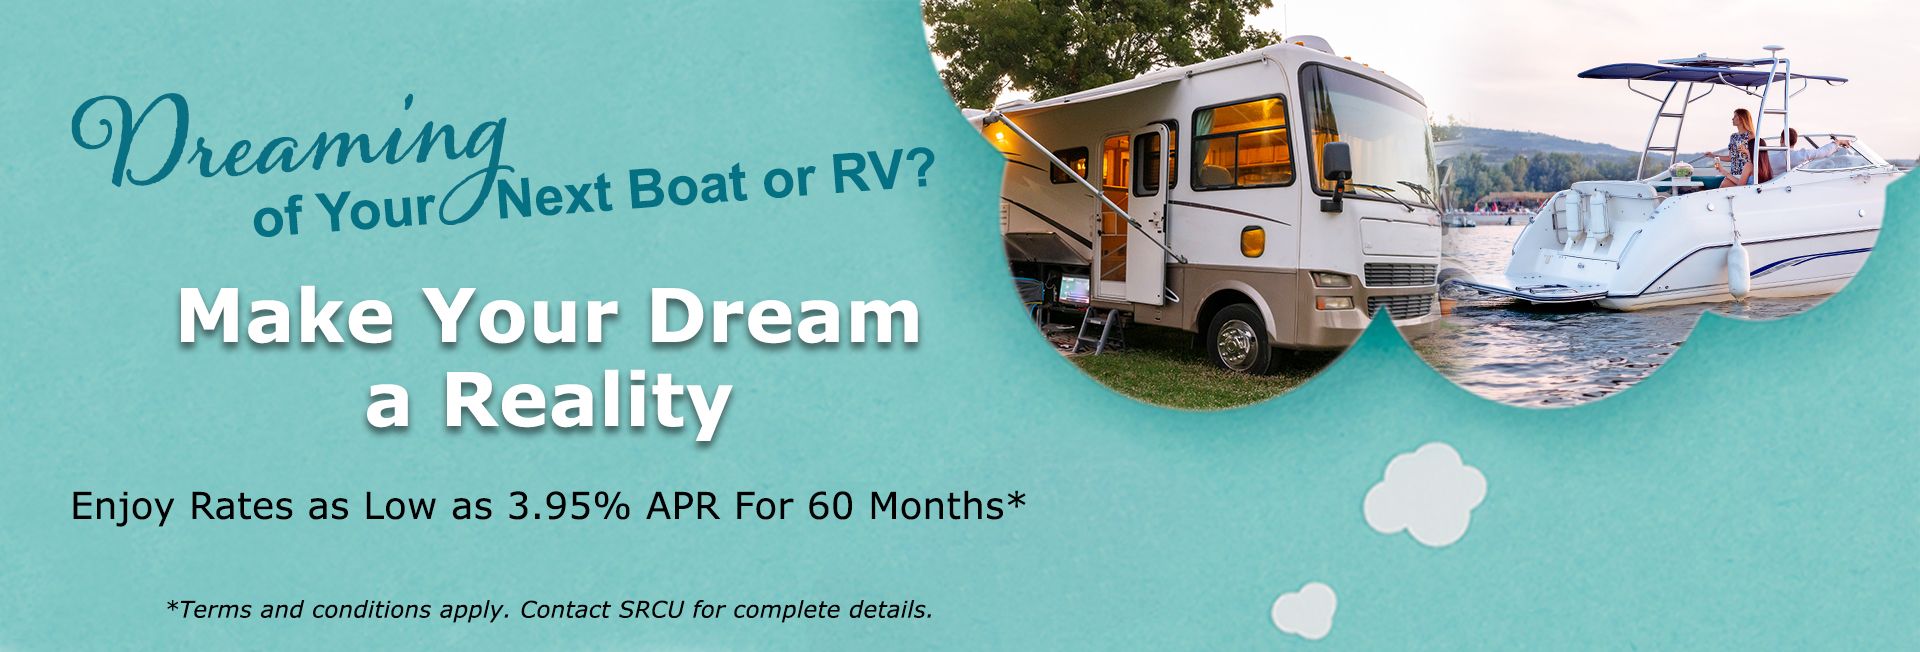 Boat or RV